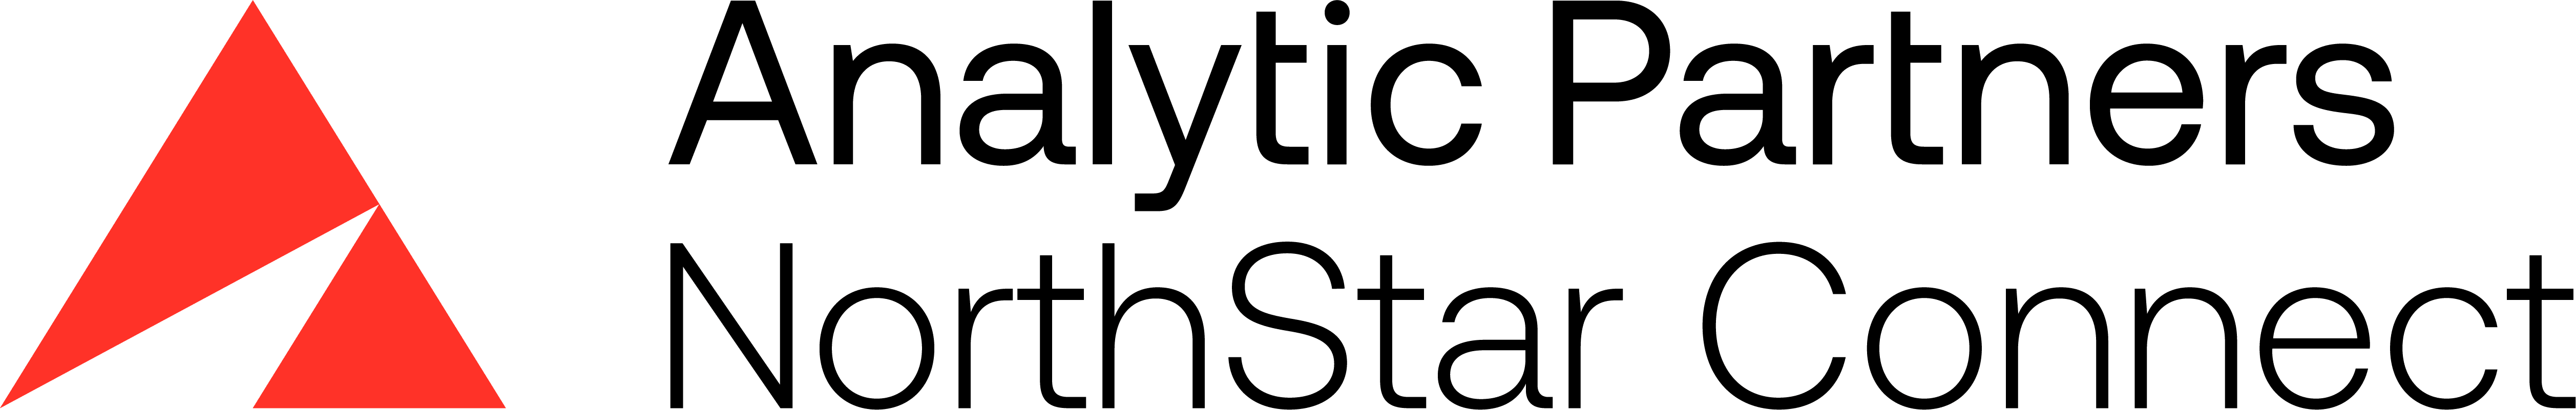 Analytic Partners | NorthStar Connect